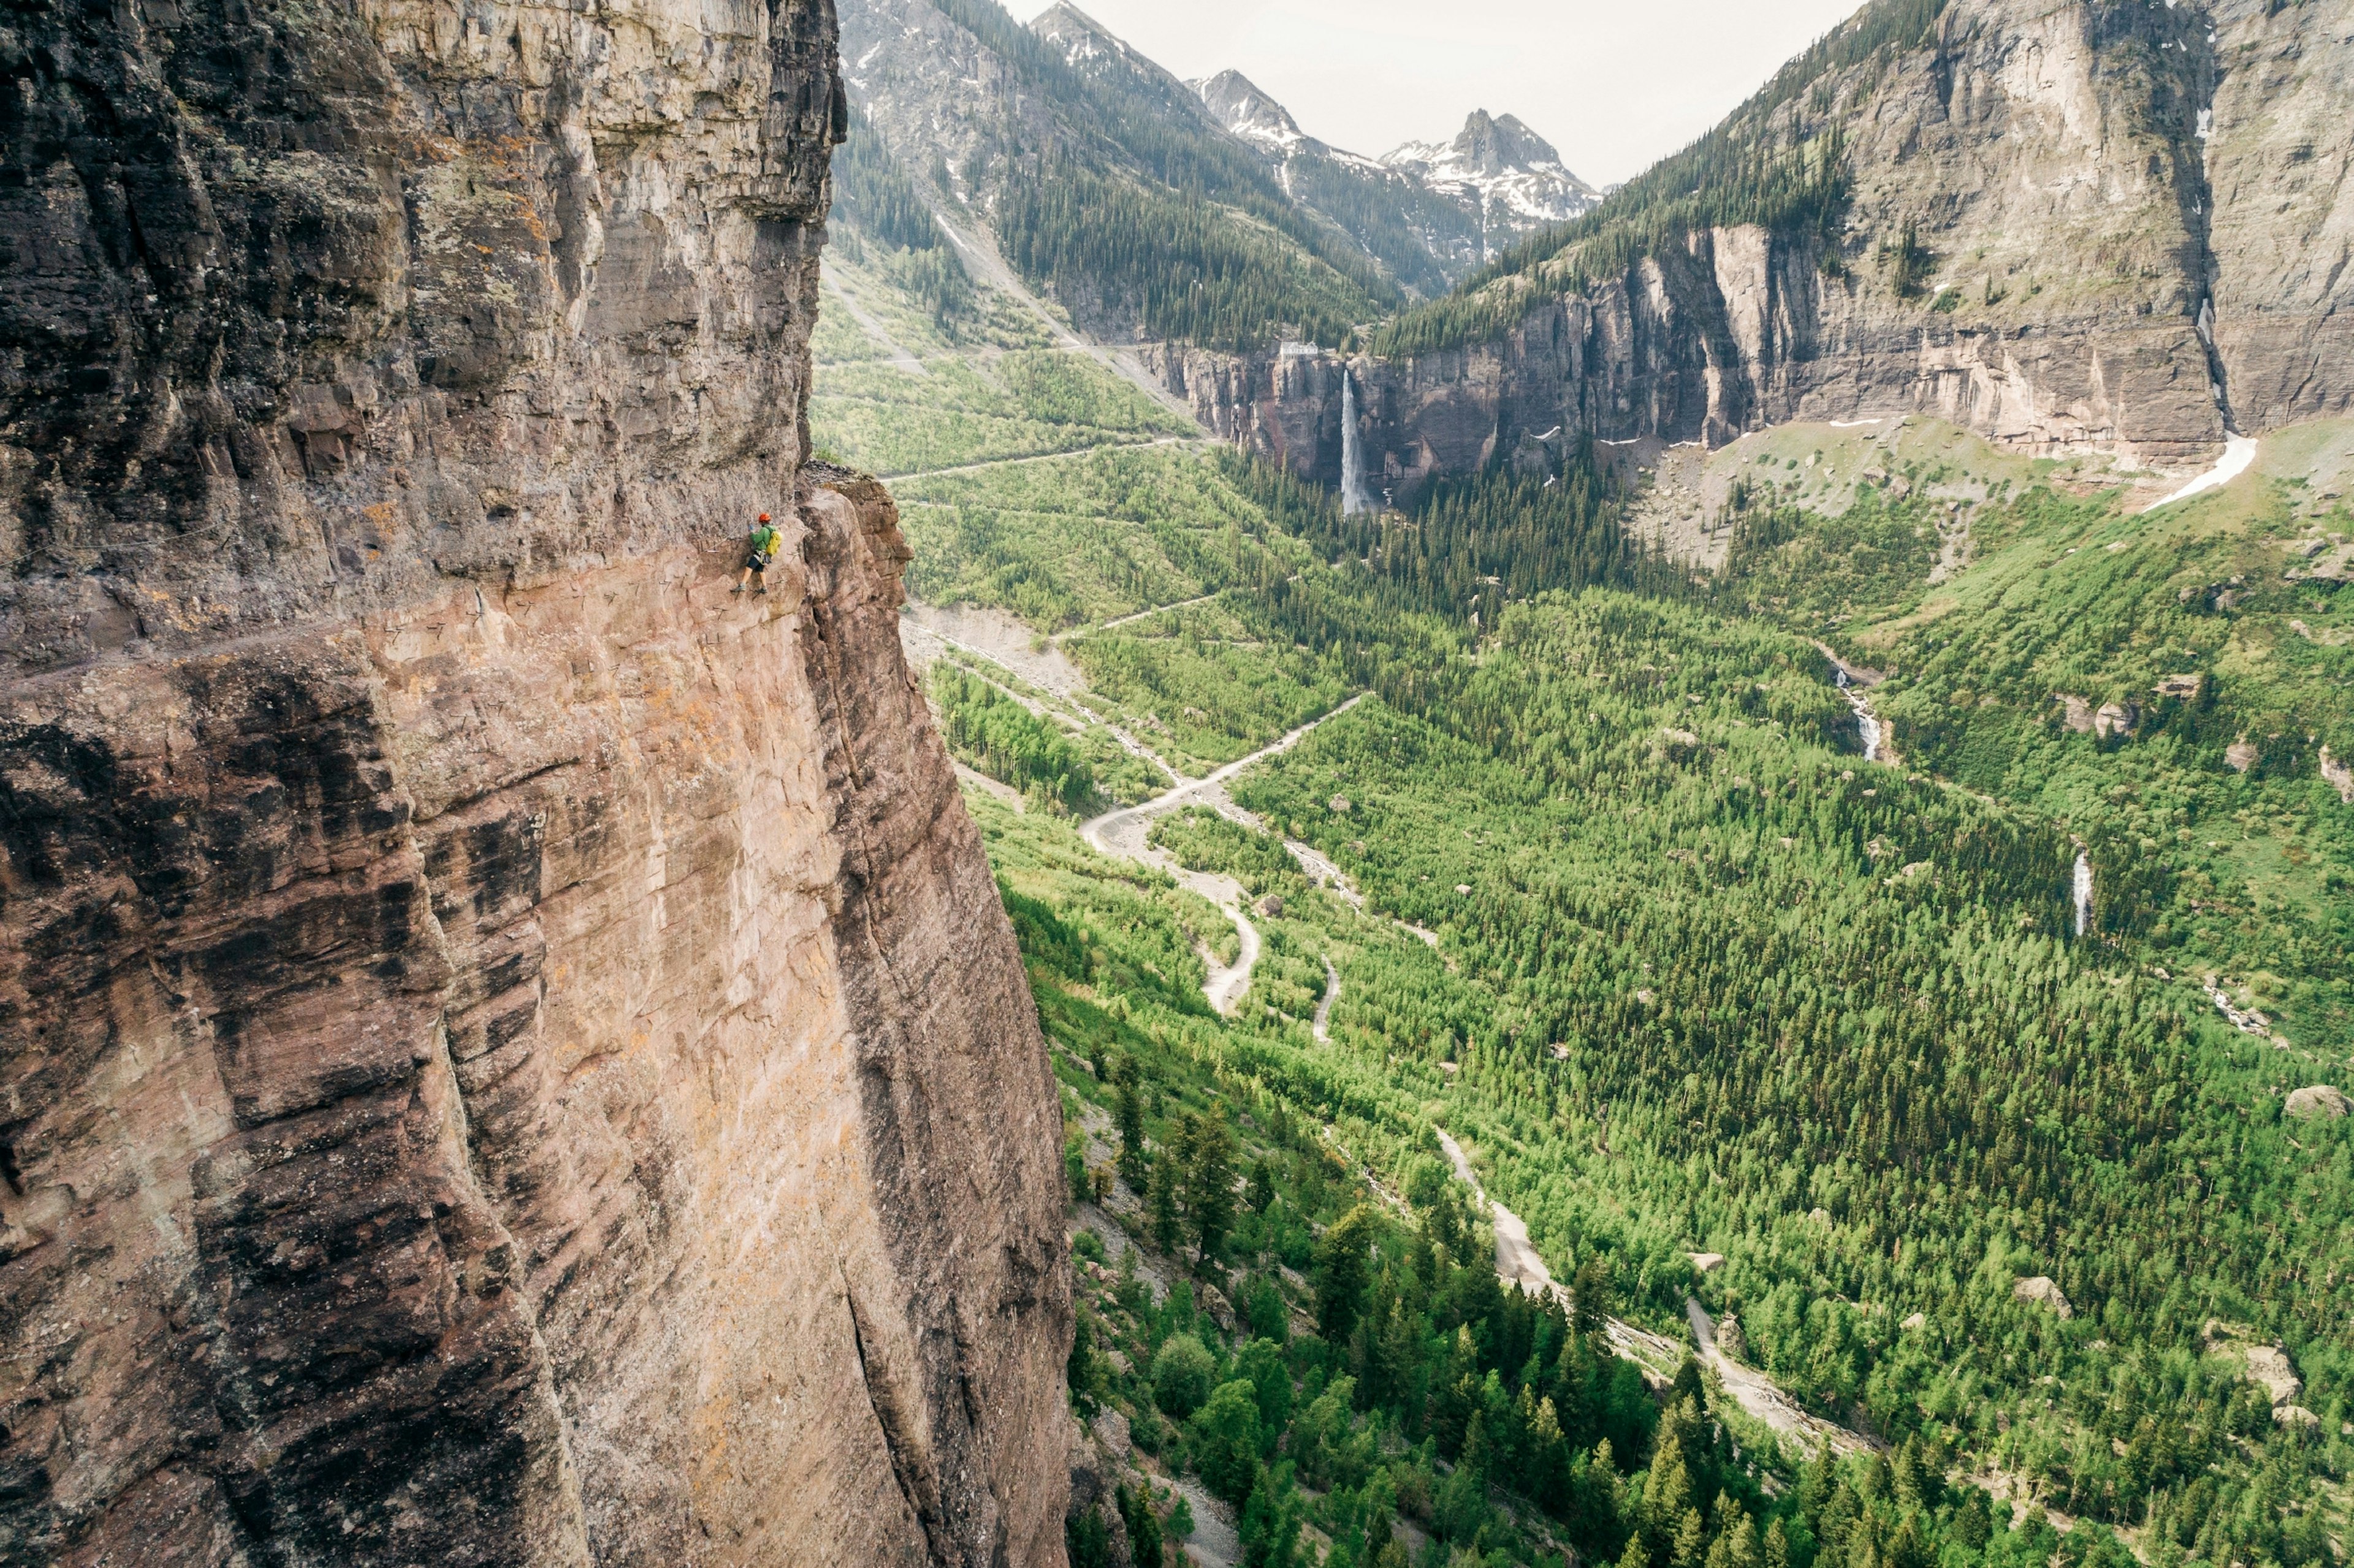 A man on the side of a cliff, crossing a via ferrata.